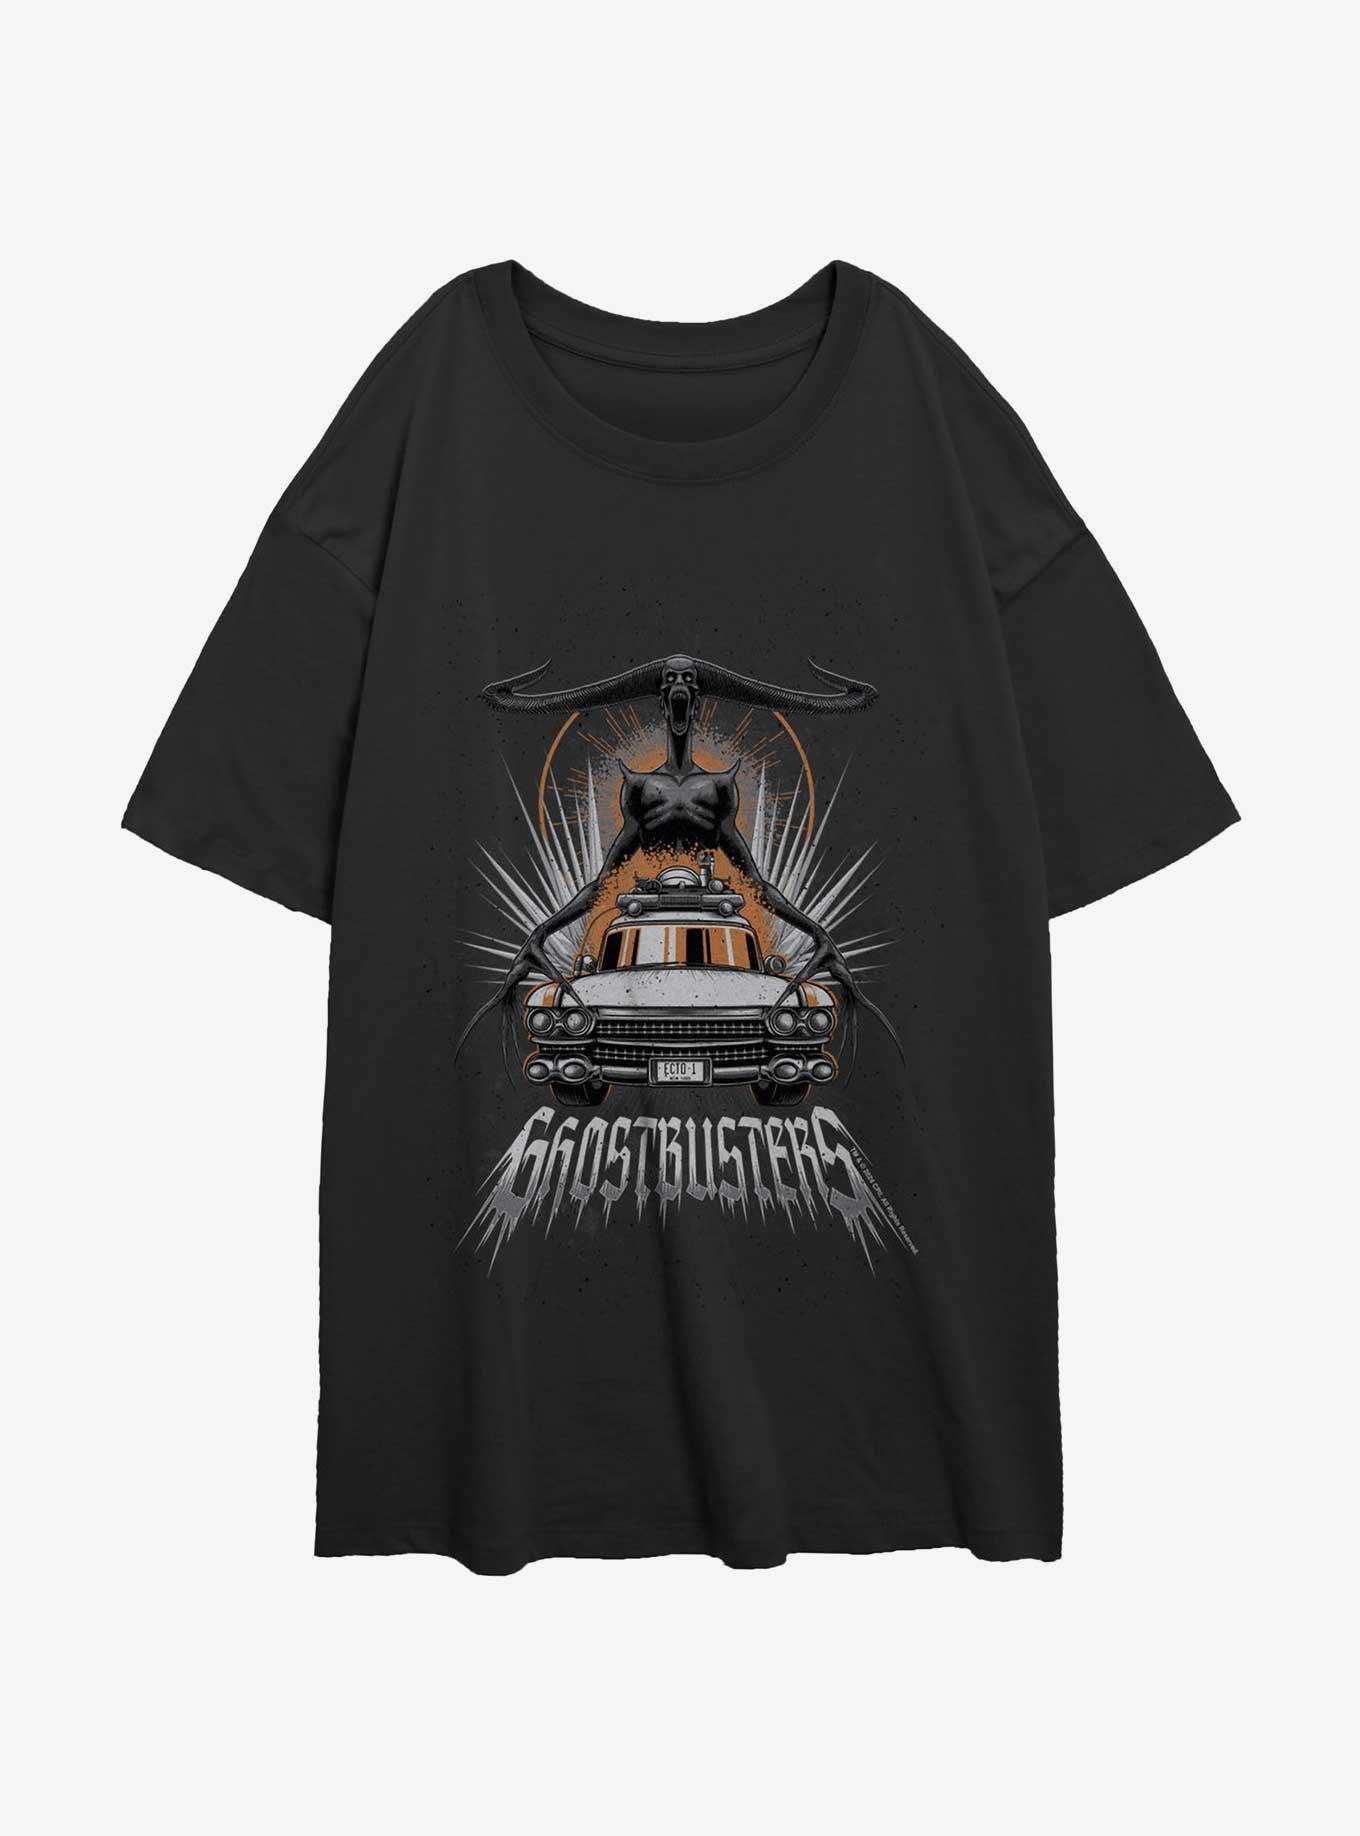 Ghostbusters Tall Dark and Horny at 12 o'clock Girls Oversized T-Shirt, , hi-res